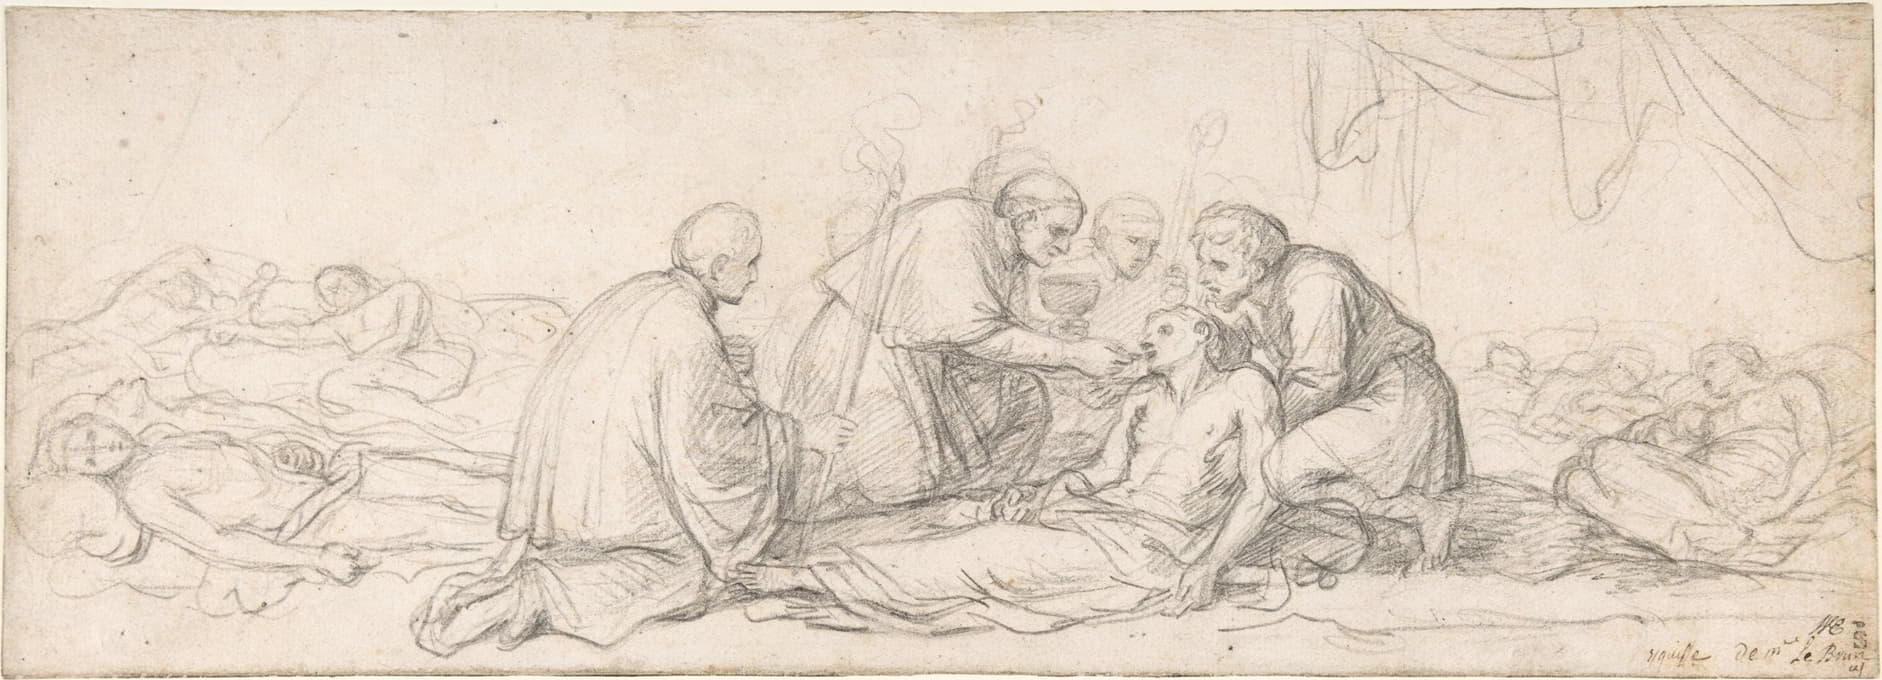 Charles Le Brun - St. Charles Borromeo Giving Communion to the Plague-Stricken